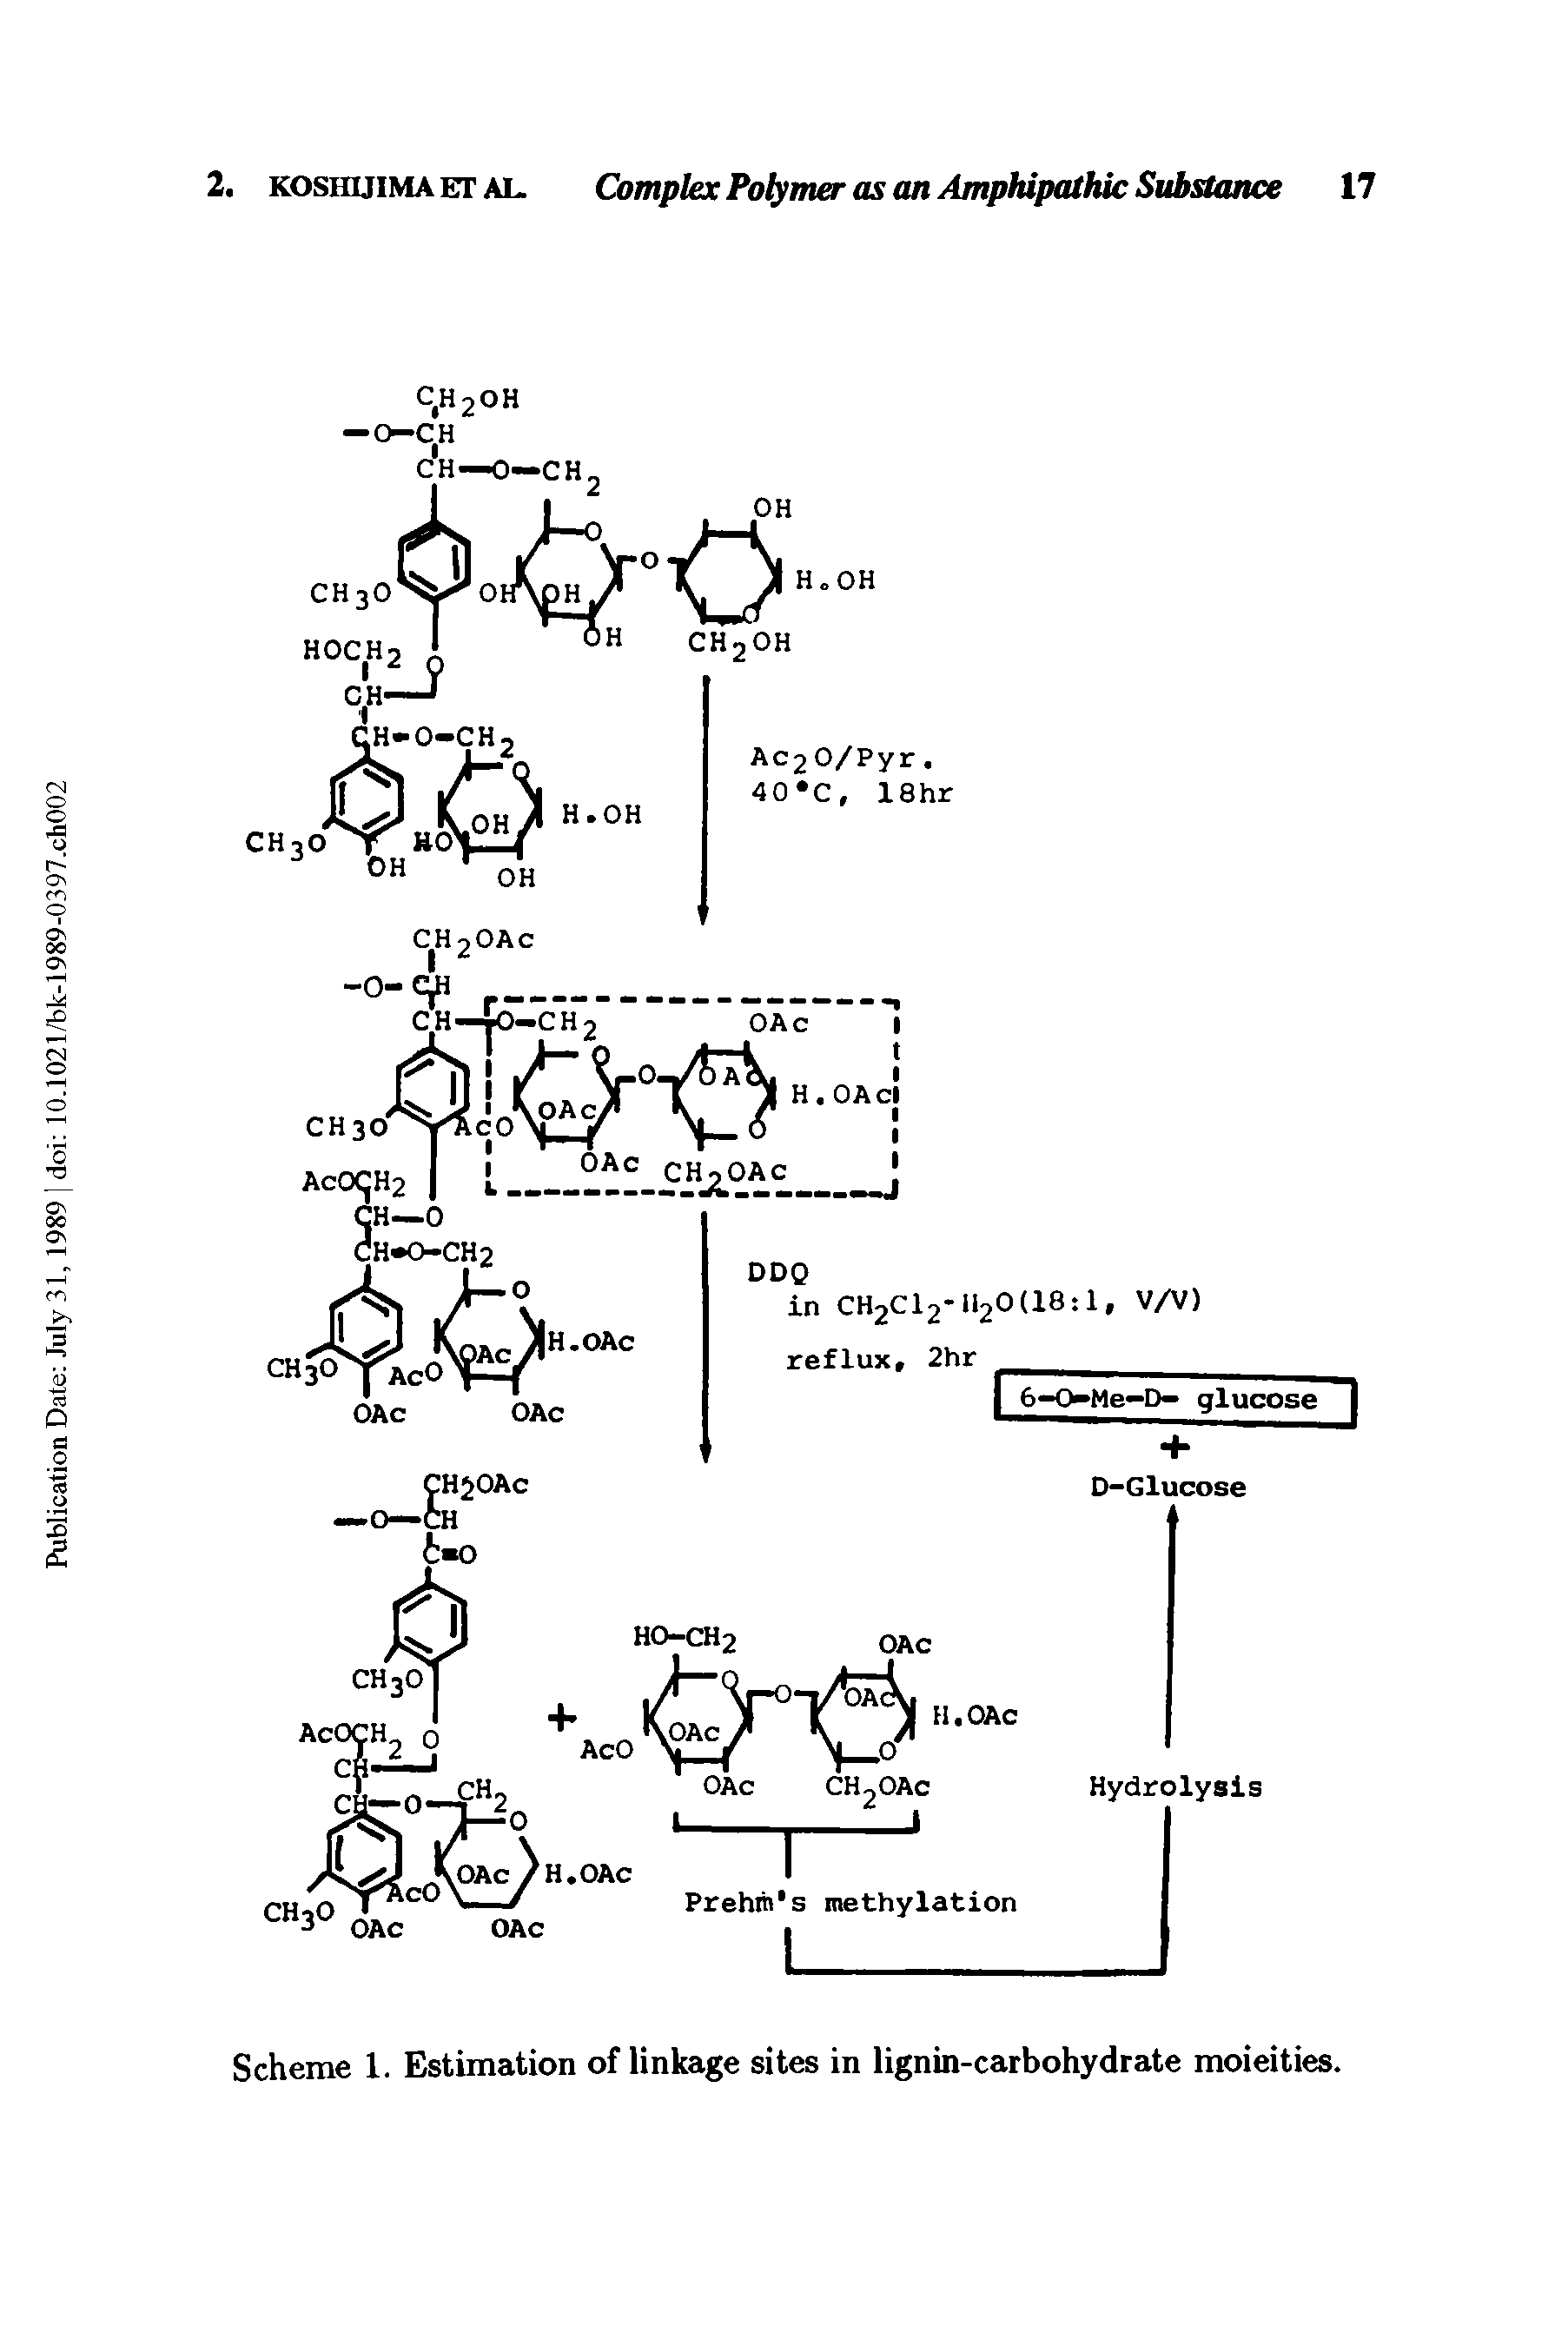 Scheme 1. Estimation of linkage sites in lignin-carbohydrate moieities.